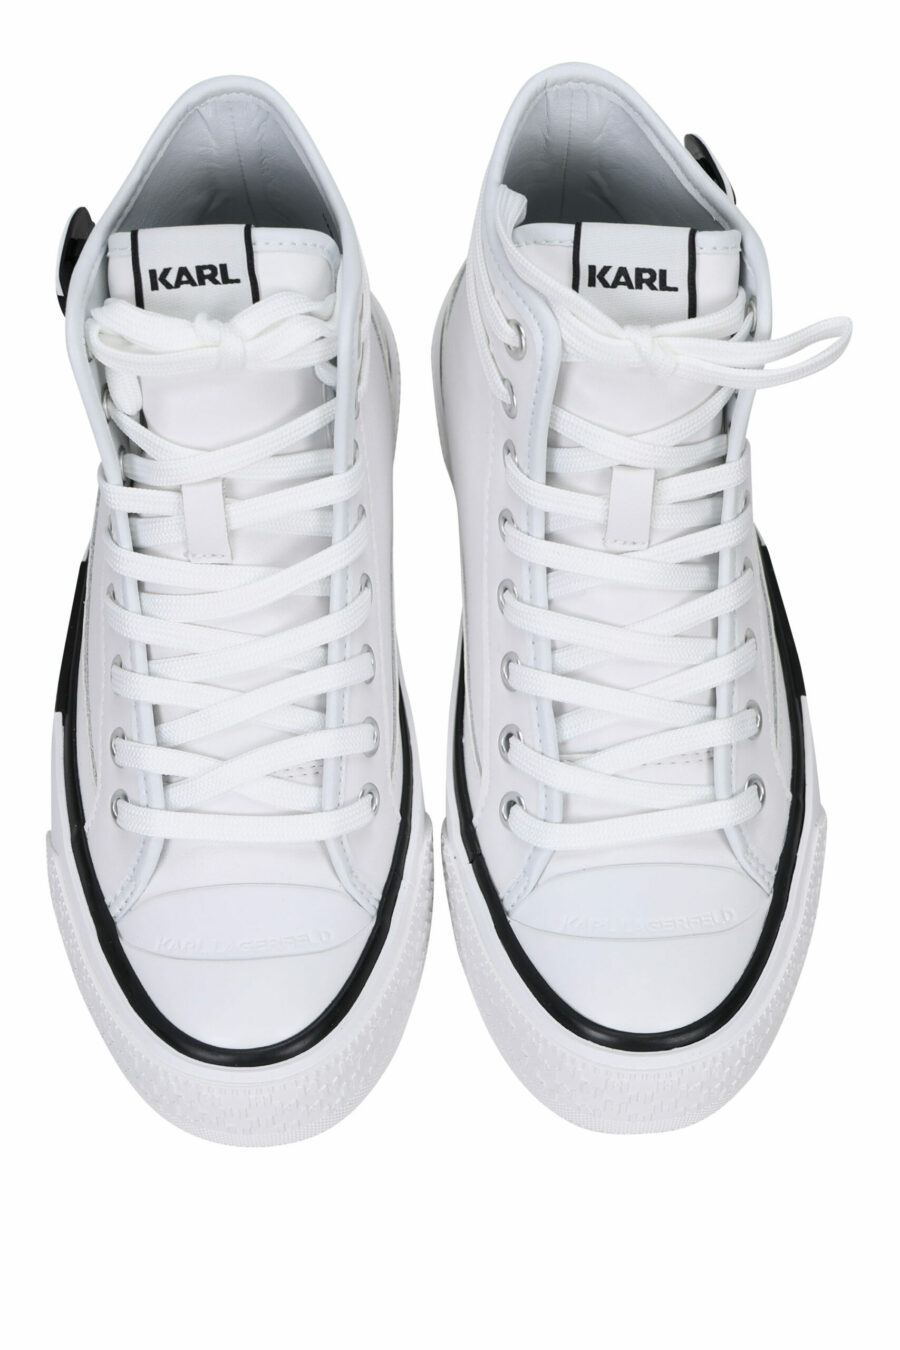 White leather high top trainers with white sole and "karl" logo - 5059529322974 4 scaled